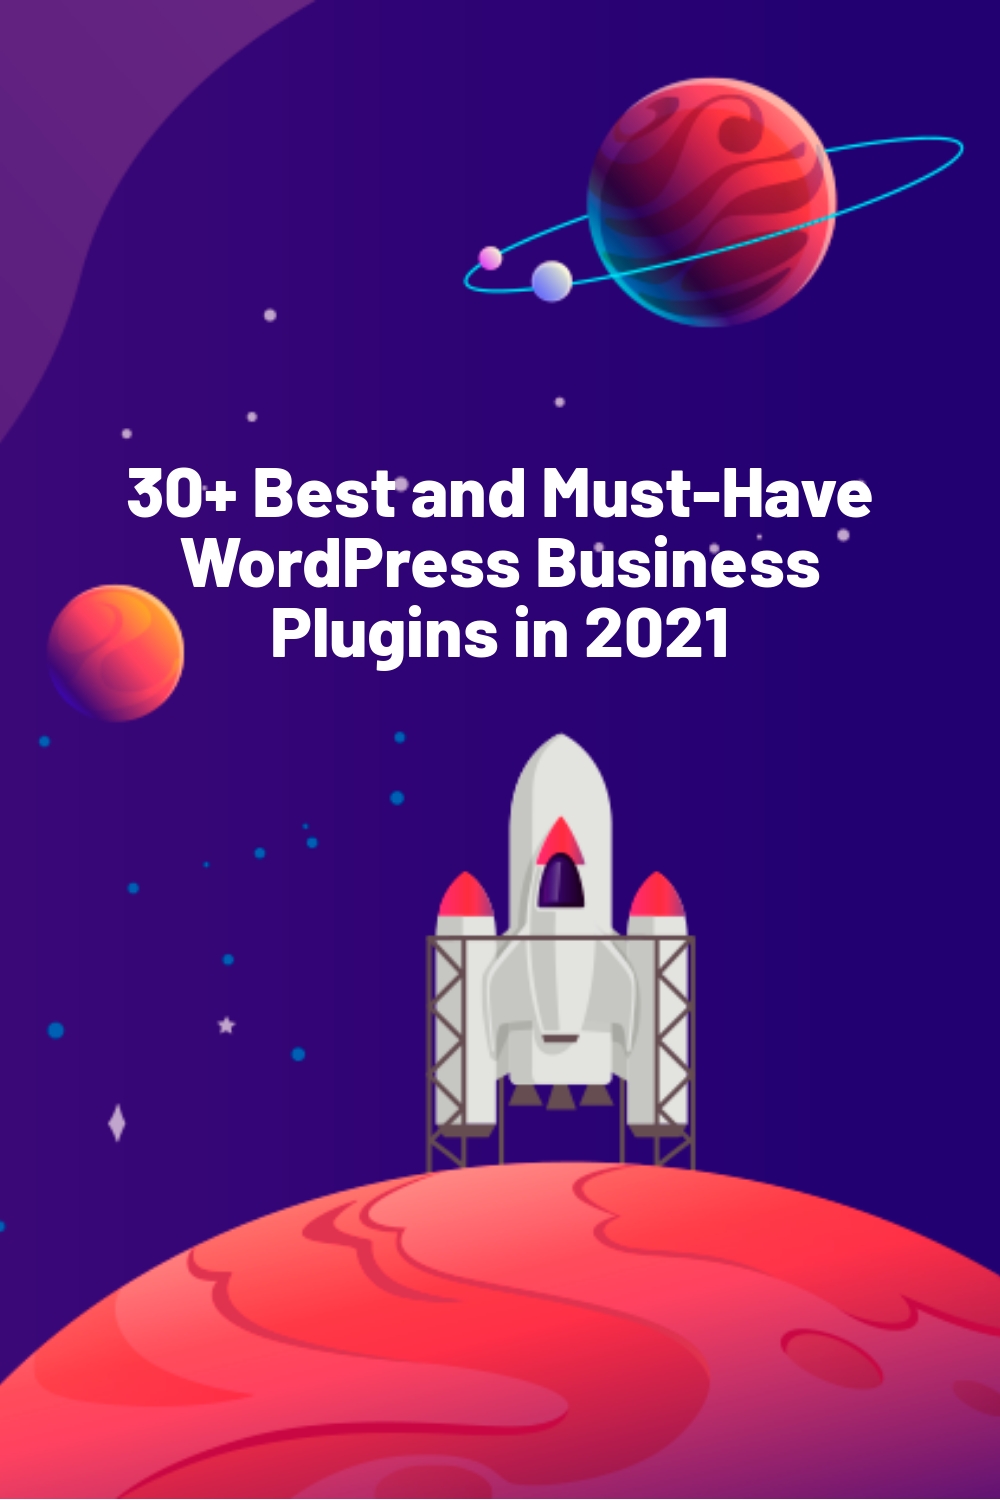 30+ Best and Must-Have WordPress Business Plugins in 2021